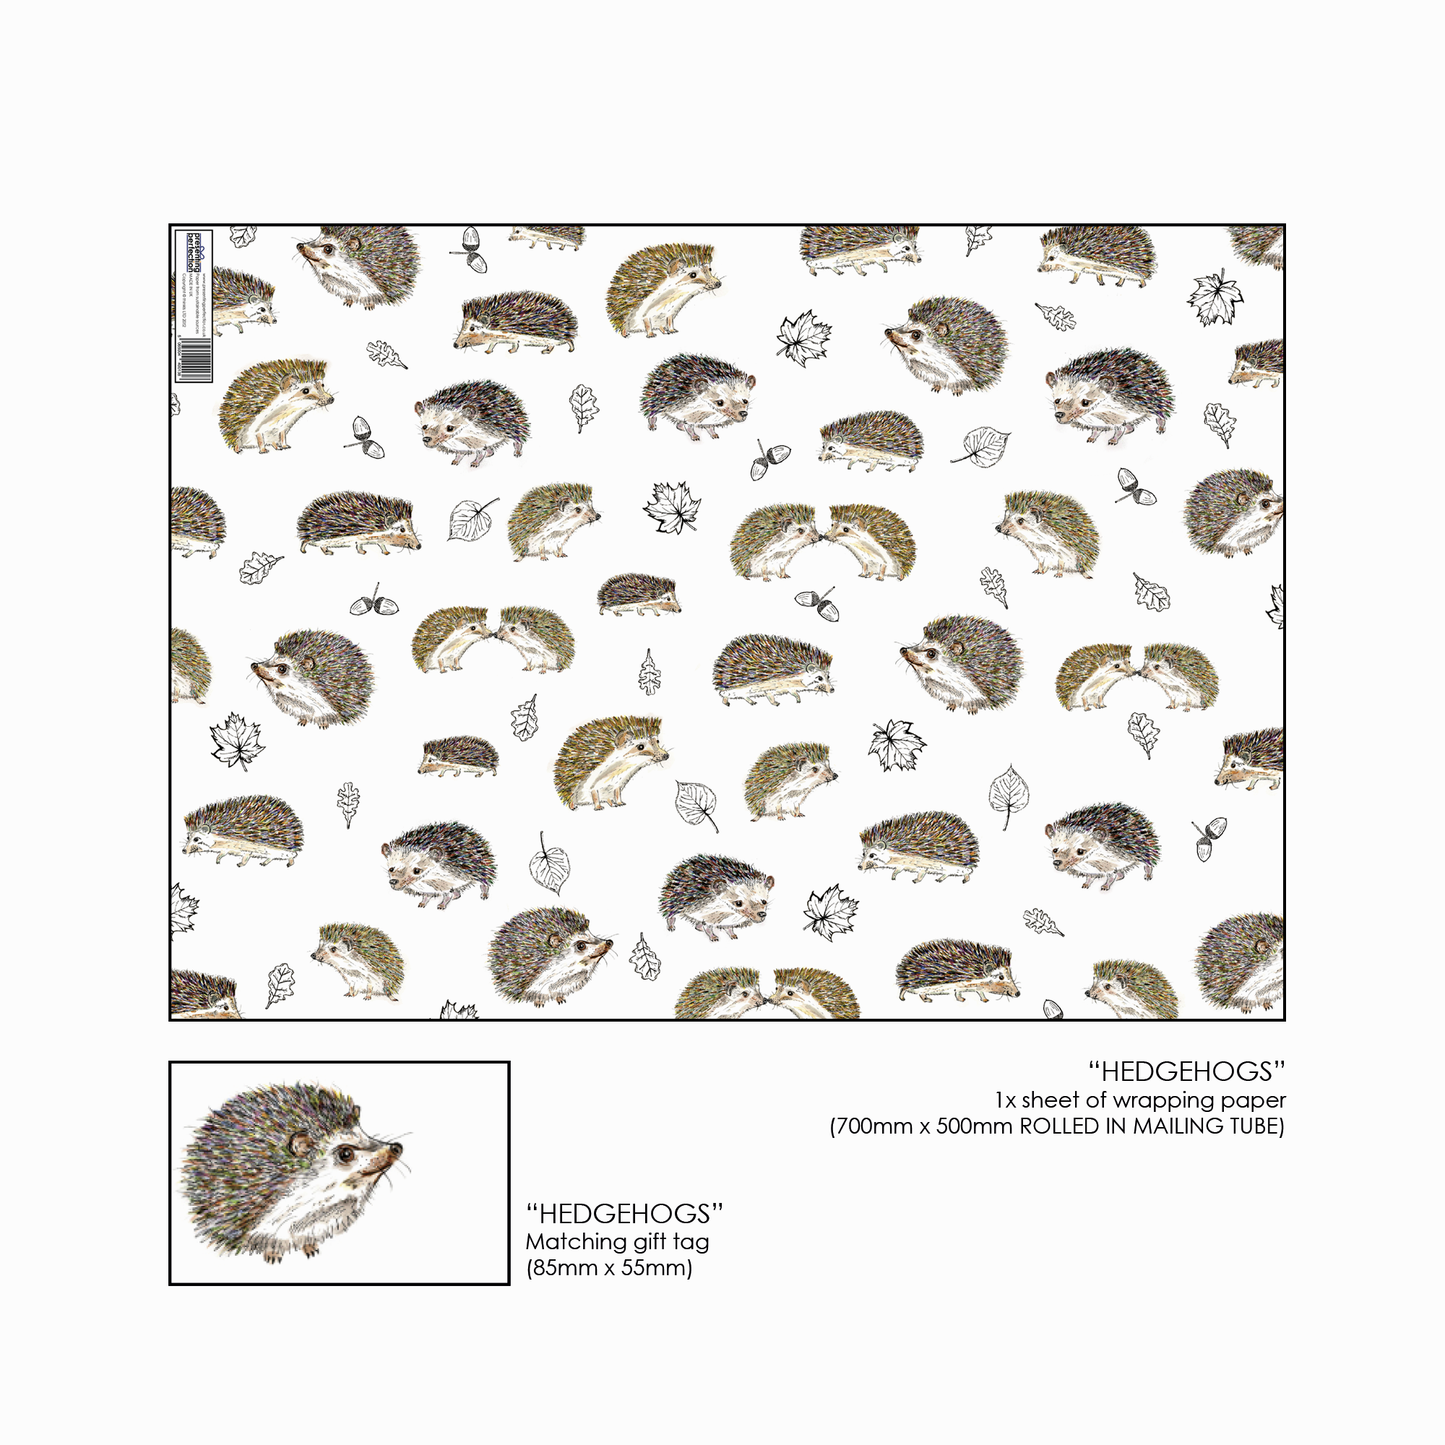 Hedgehog Design Wrapping Paper and Gift Tag (Small print error) - Rolled